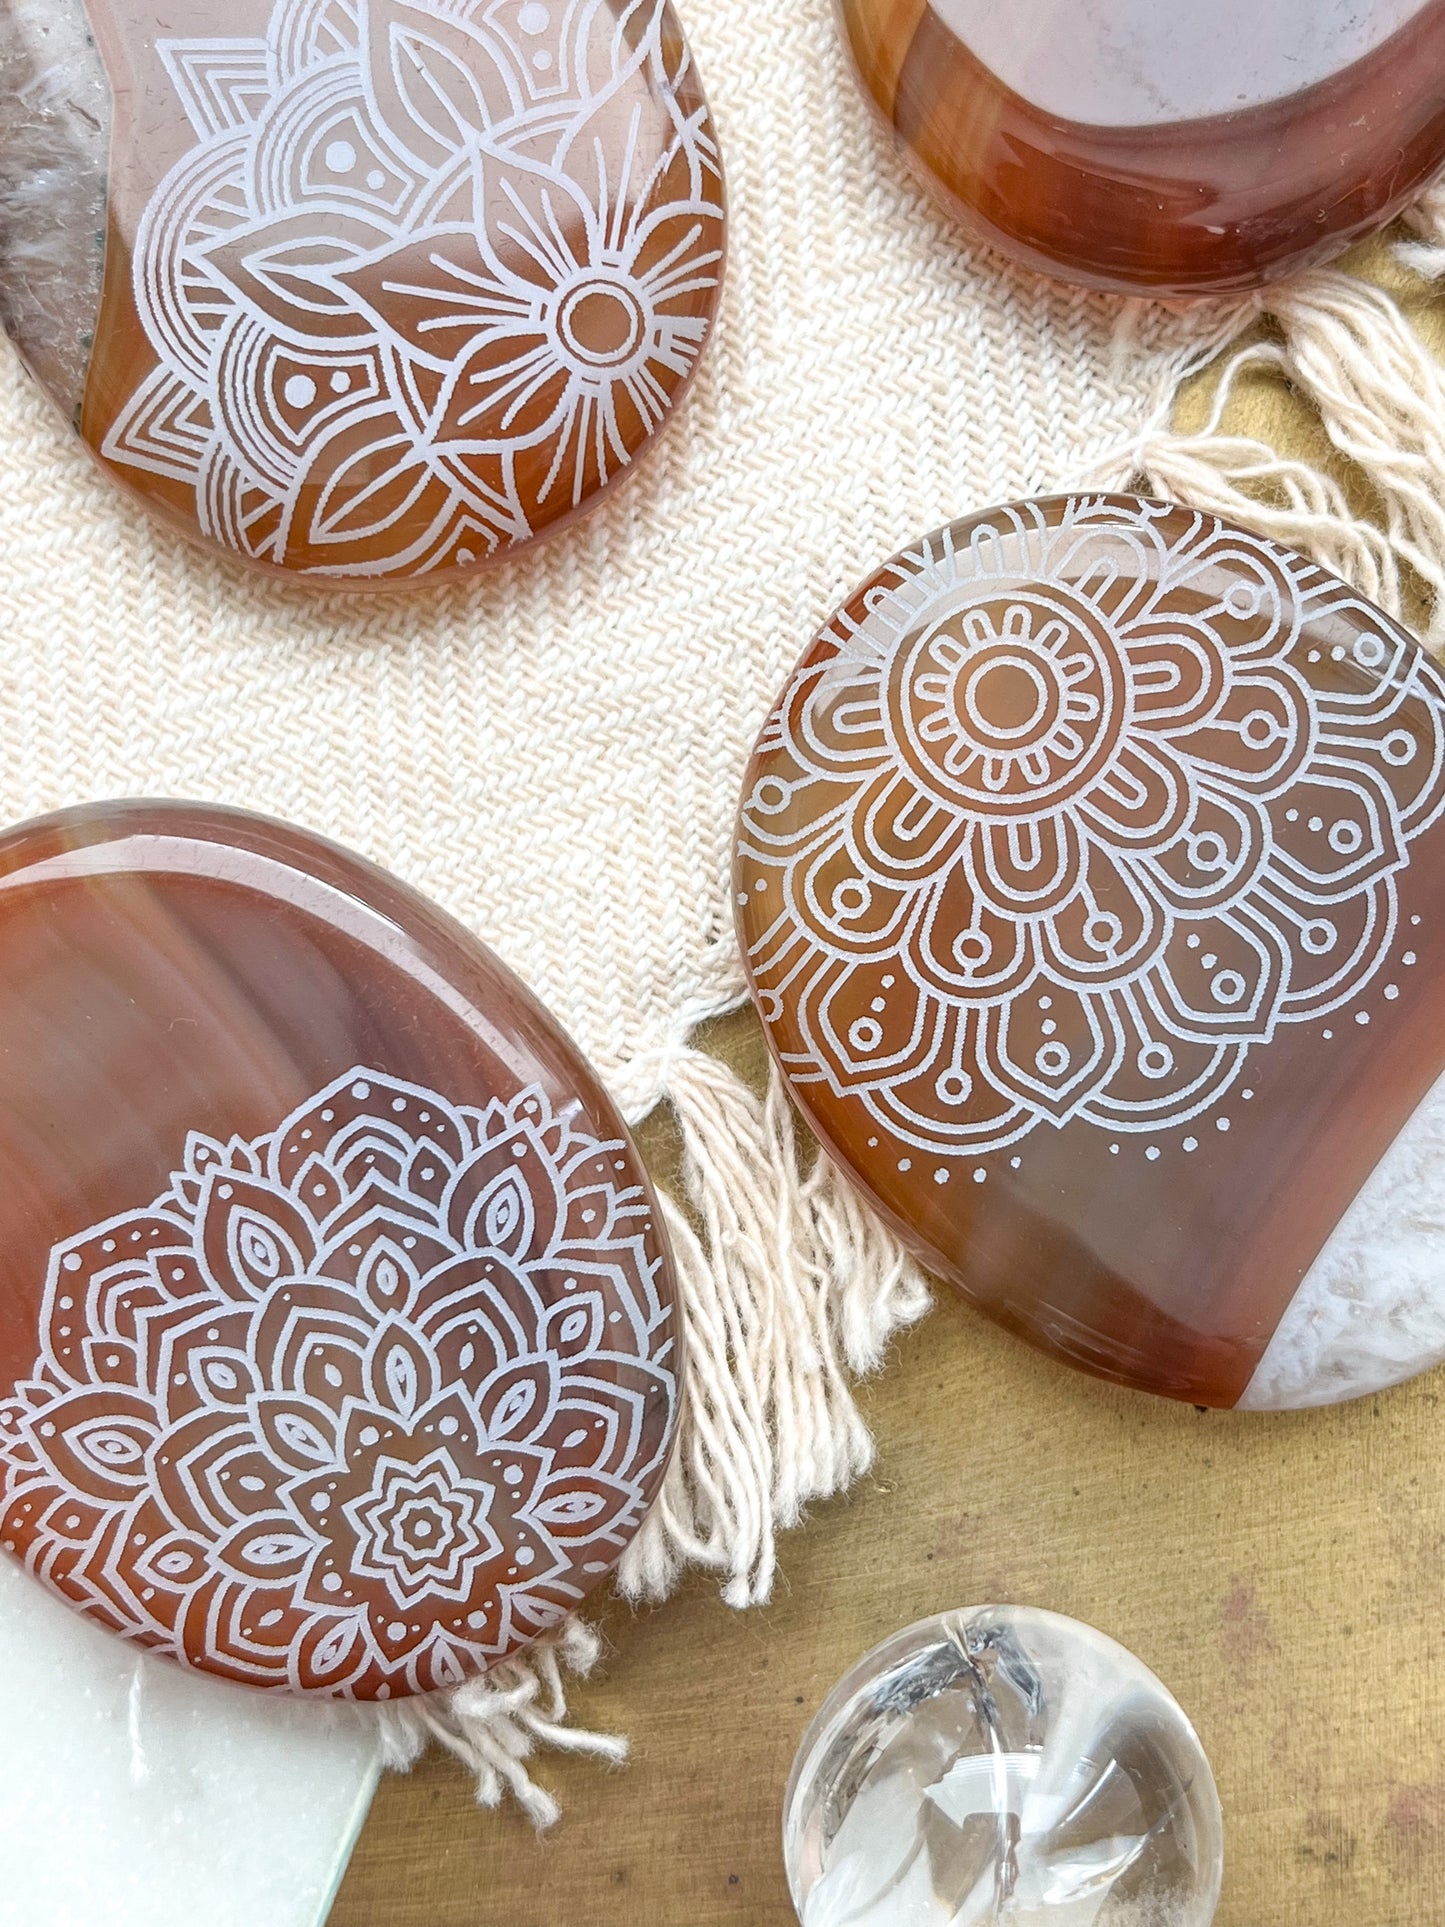 Carnelian Agate Worry Stone Etched with Various Mandalas - Fractalista Designs